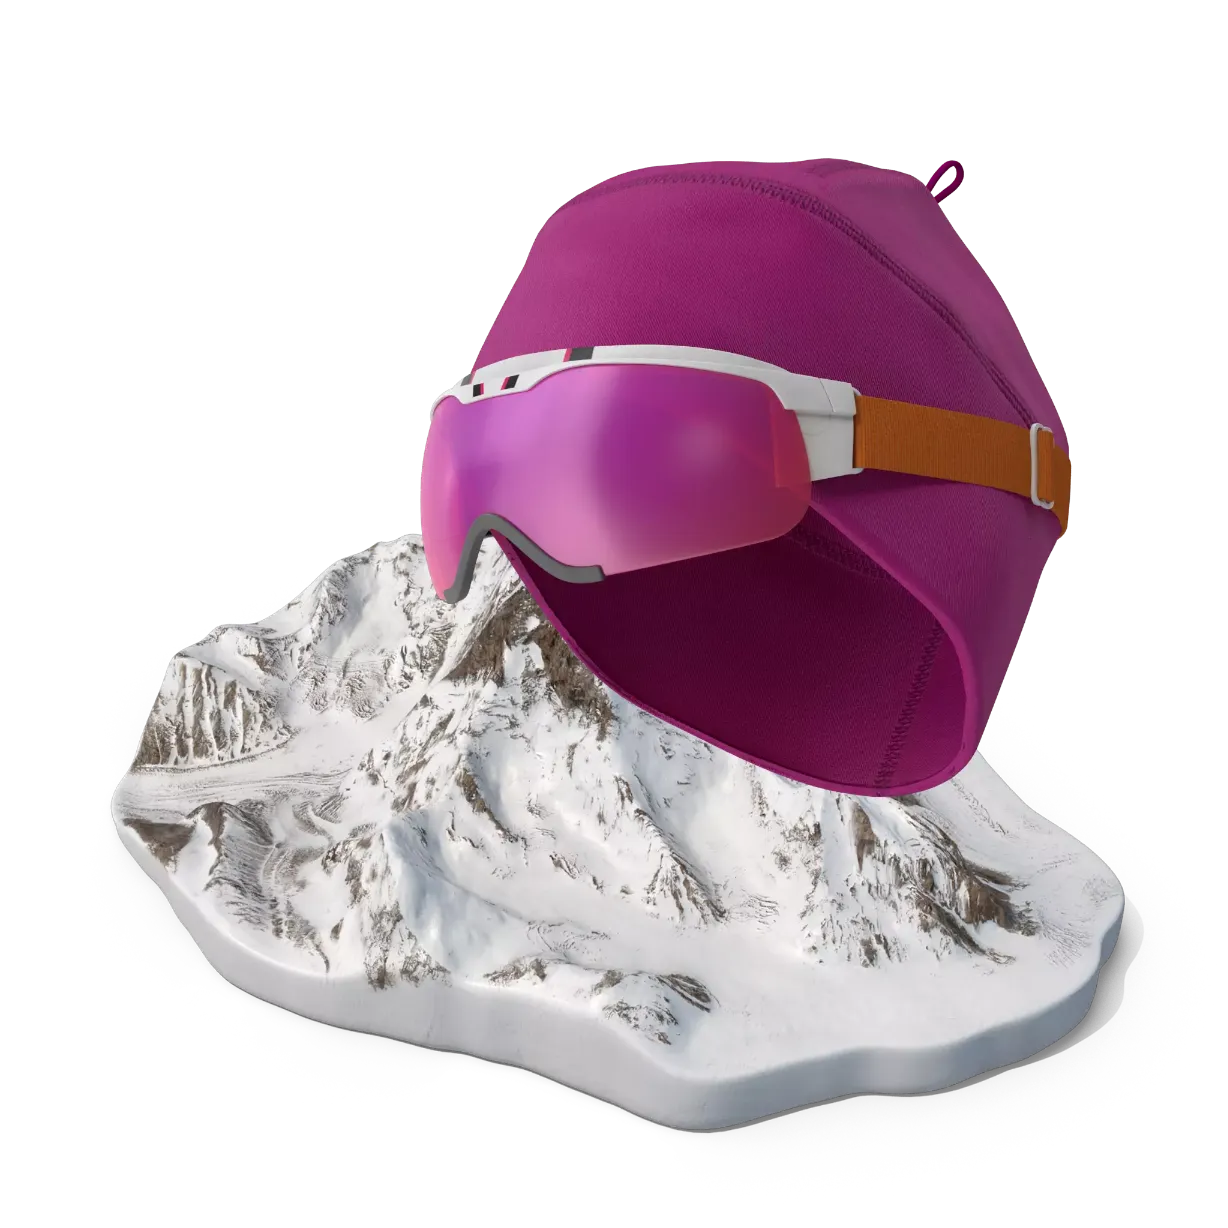 A ski cap and the outline of a mountain as the Aosta Valley Card case study header image